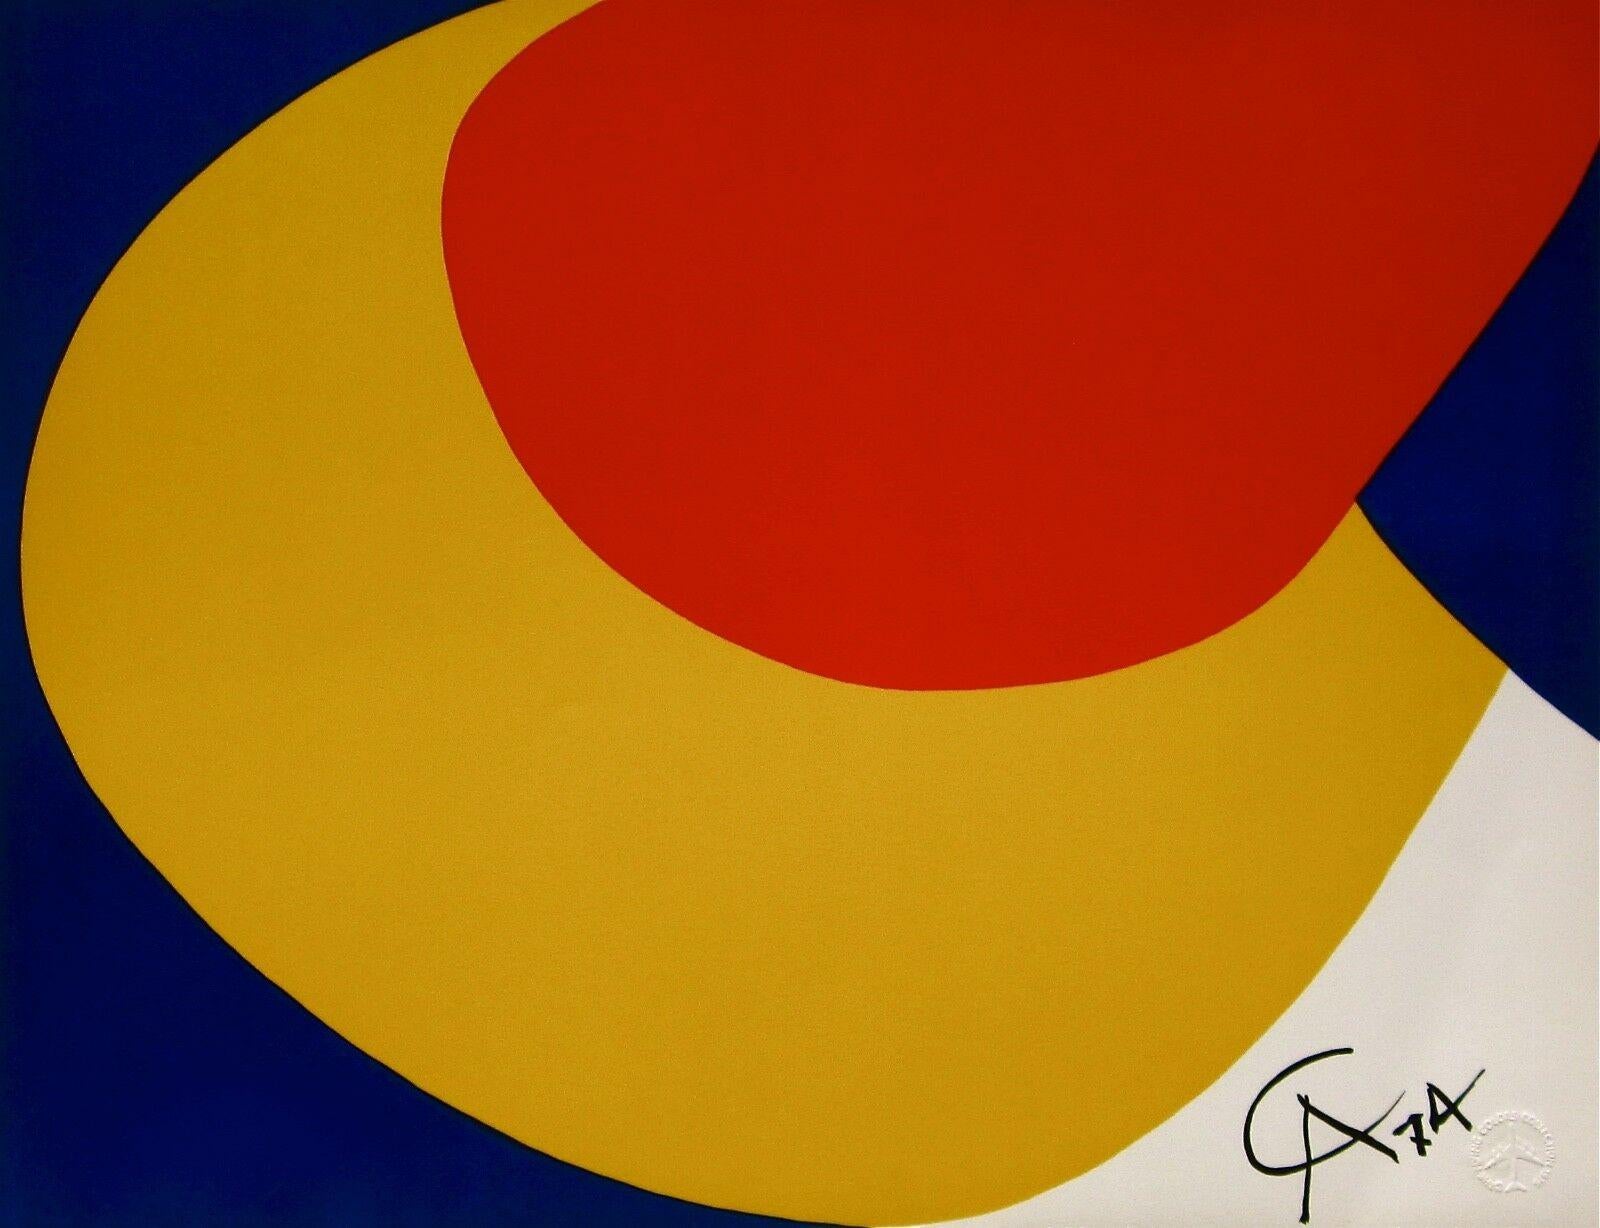 Artist: Alexander Calder (1898-1976)
Title: Convection (from the Braniff International Airways Flying Colors Collection)
Year: 1974
Medium: Lithograph on Arches paper 
Size: 20 x 26 inches
Condition: Excellent
Edition: 3,000, plus